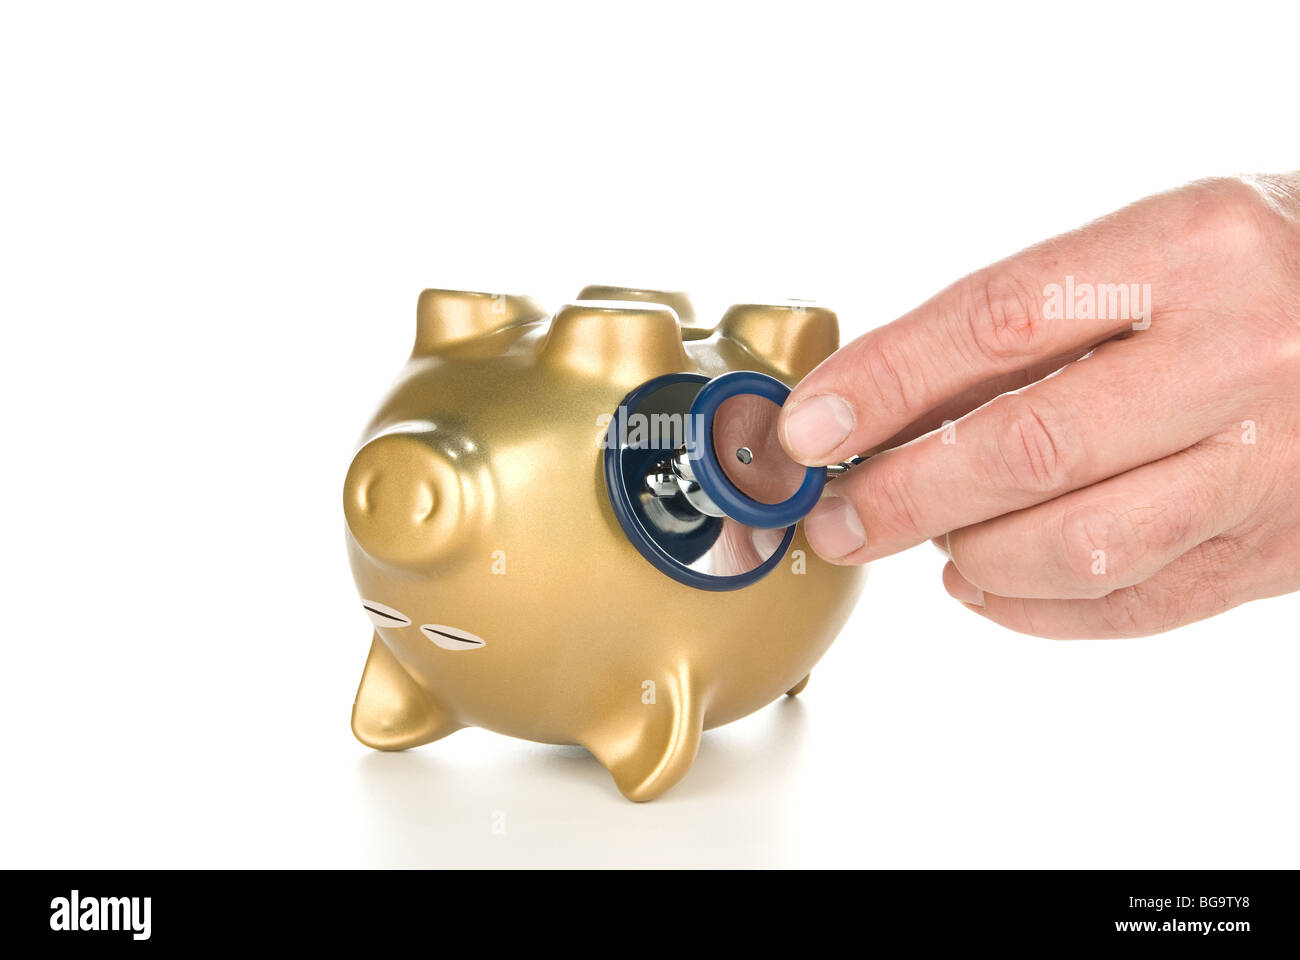 An unconscious piggy bank being examined with a stethoscope for its financial life after a poor economy and recession. Stock Photo